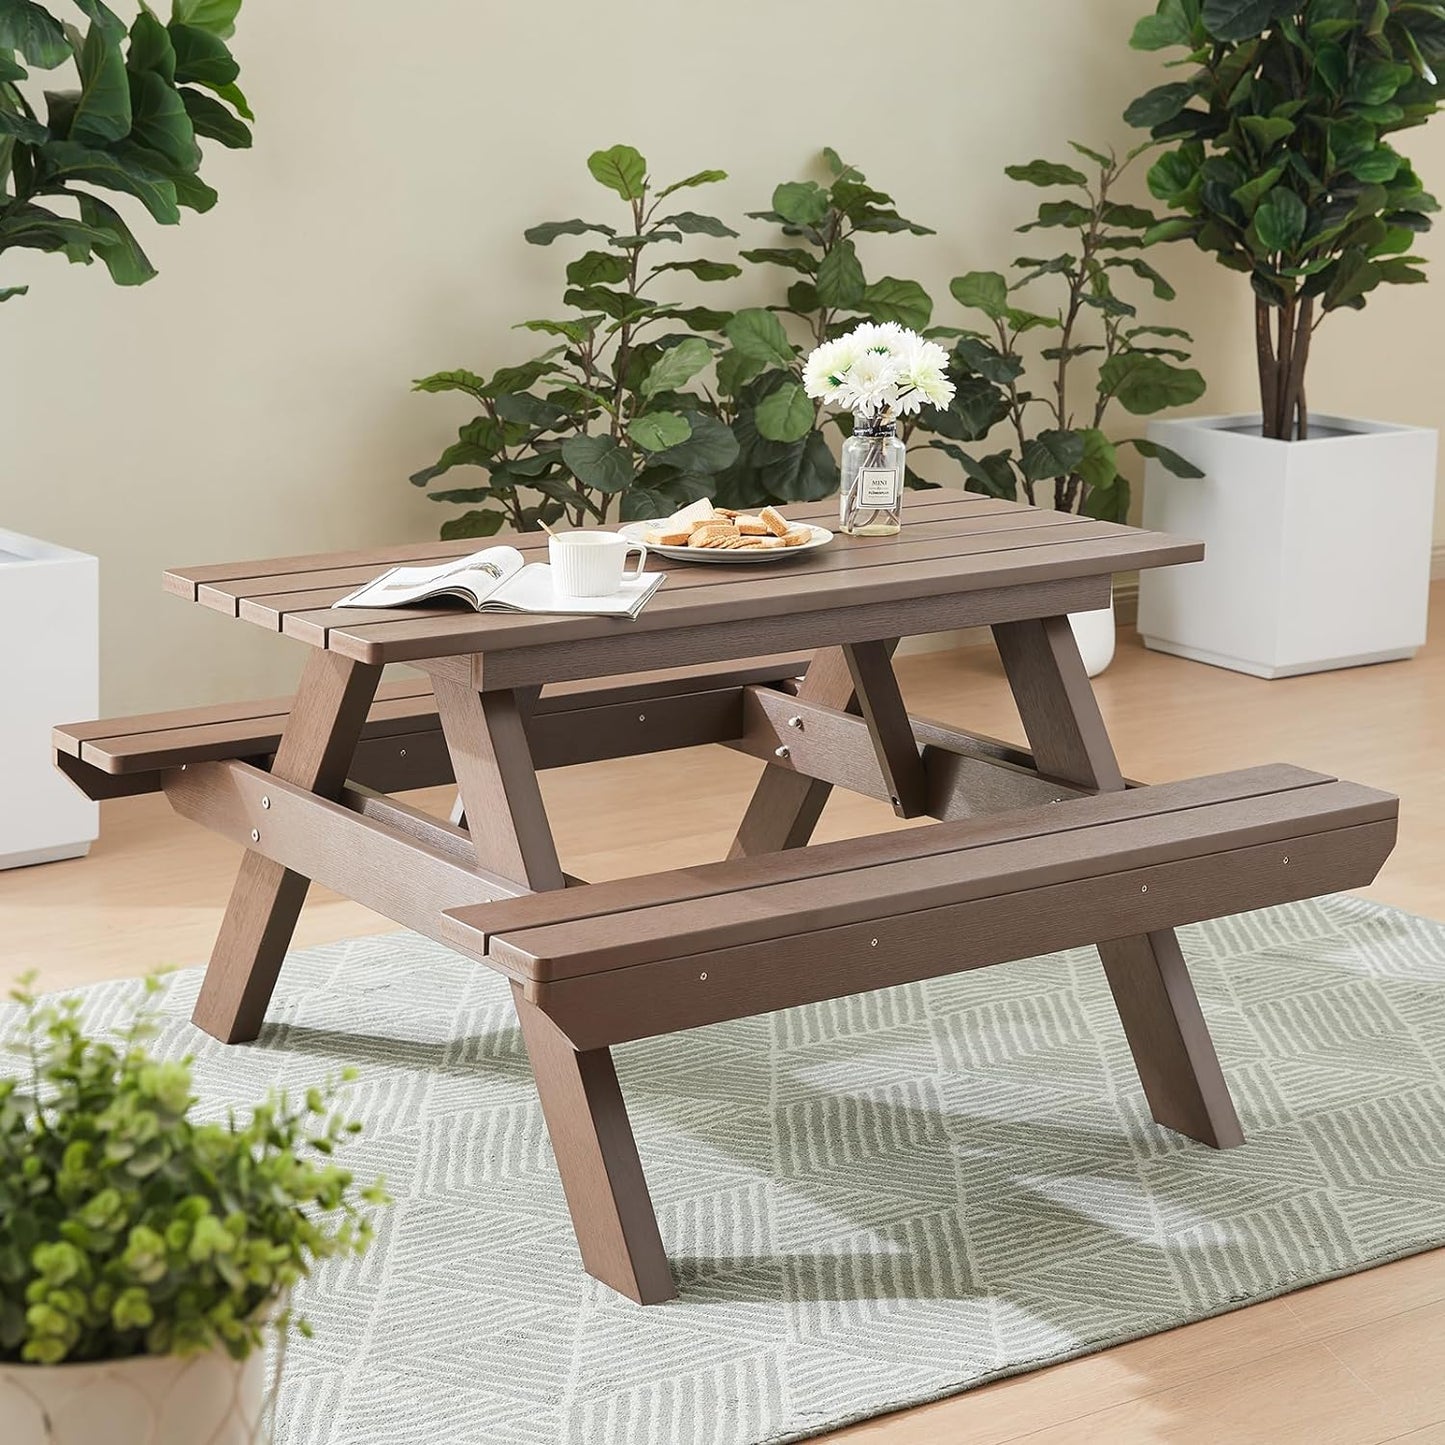 Psilvam All-in-One Outdoor Table and Chairs Teak Color